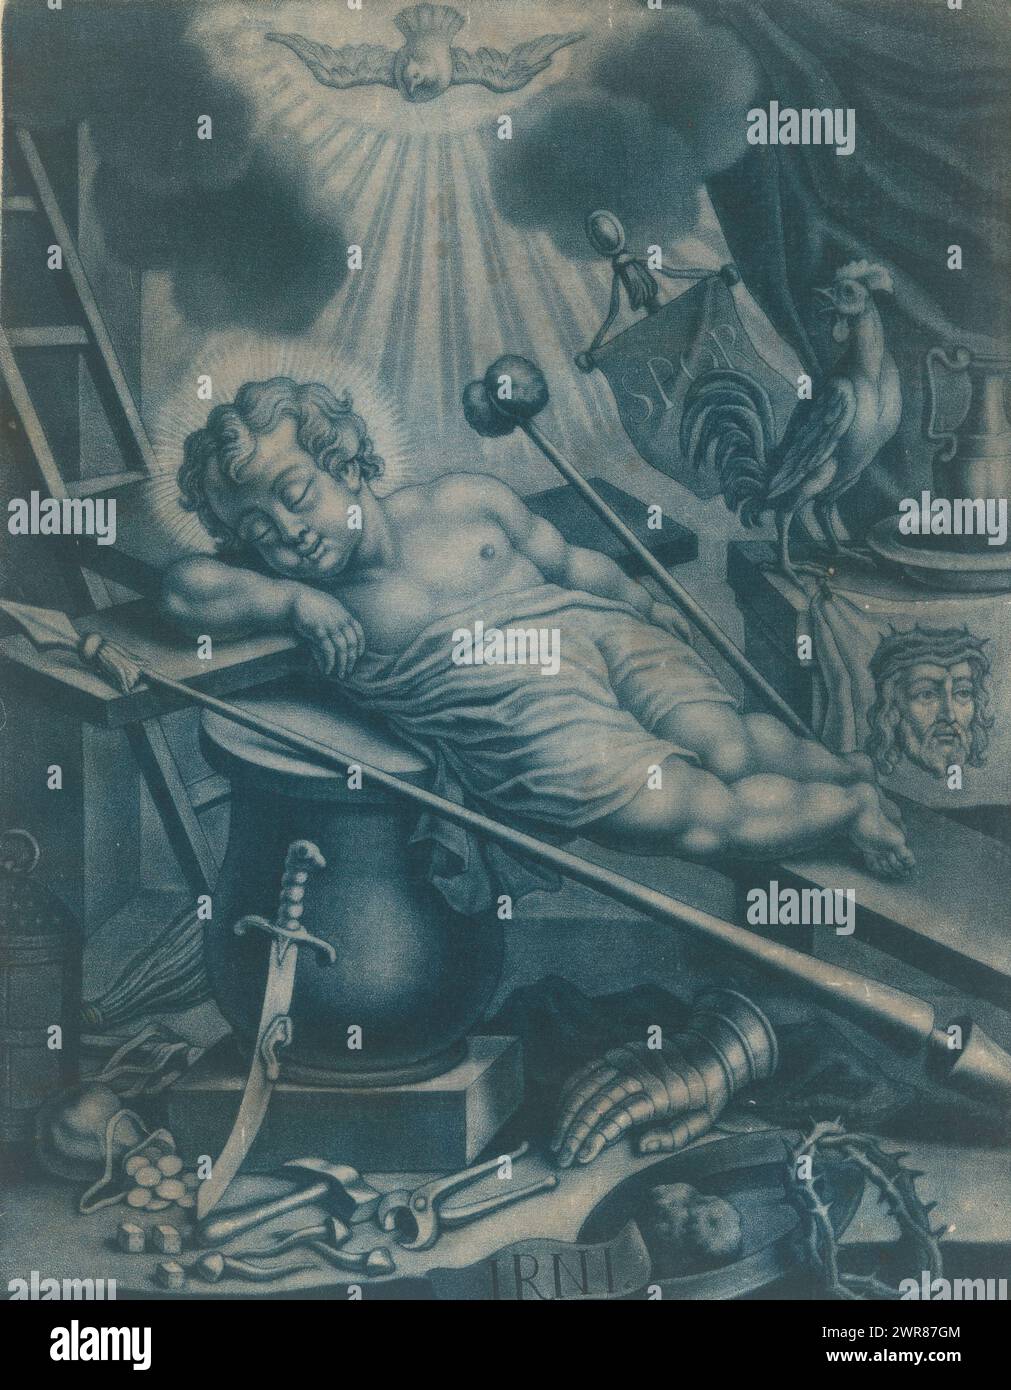 Christ child sleeping among the instruments of torture, print maker: anonymous, publisher: Johann Christian Leopold, (possibly), Germany, 1709 - 1755, paper, height 316 mm × width 246 mm, print Stock Photo